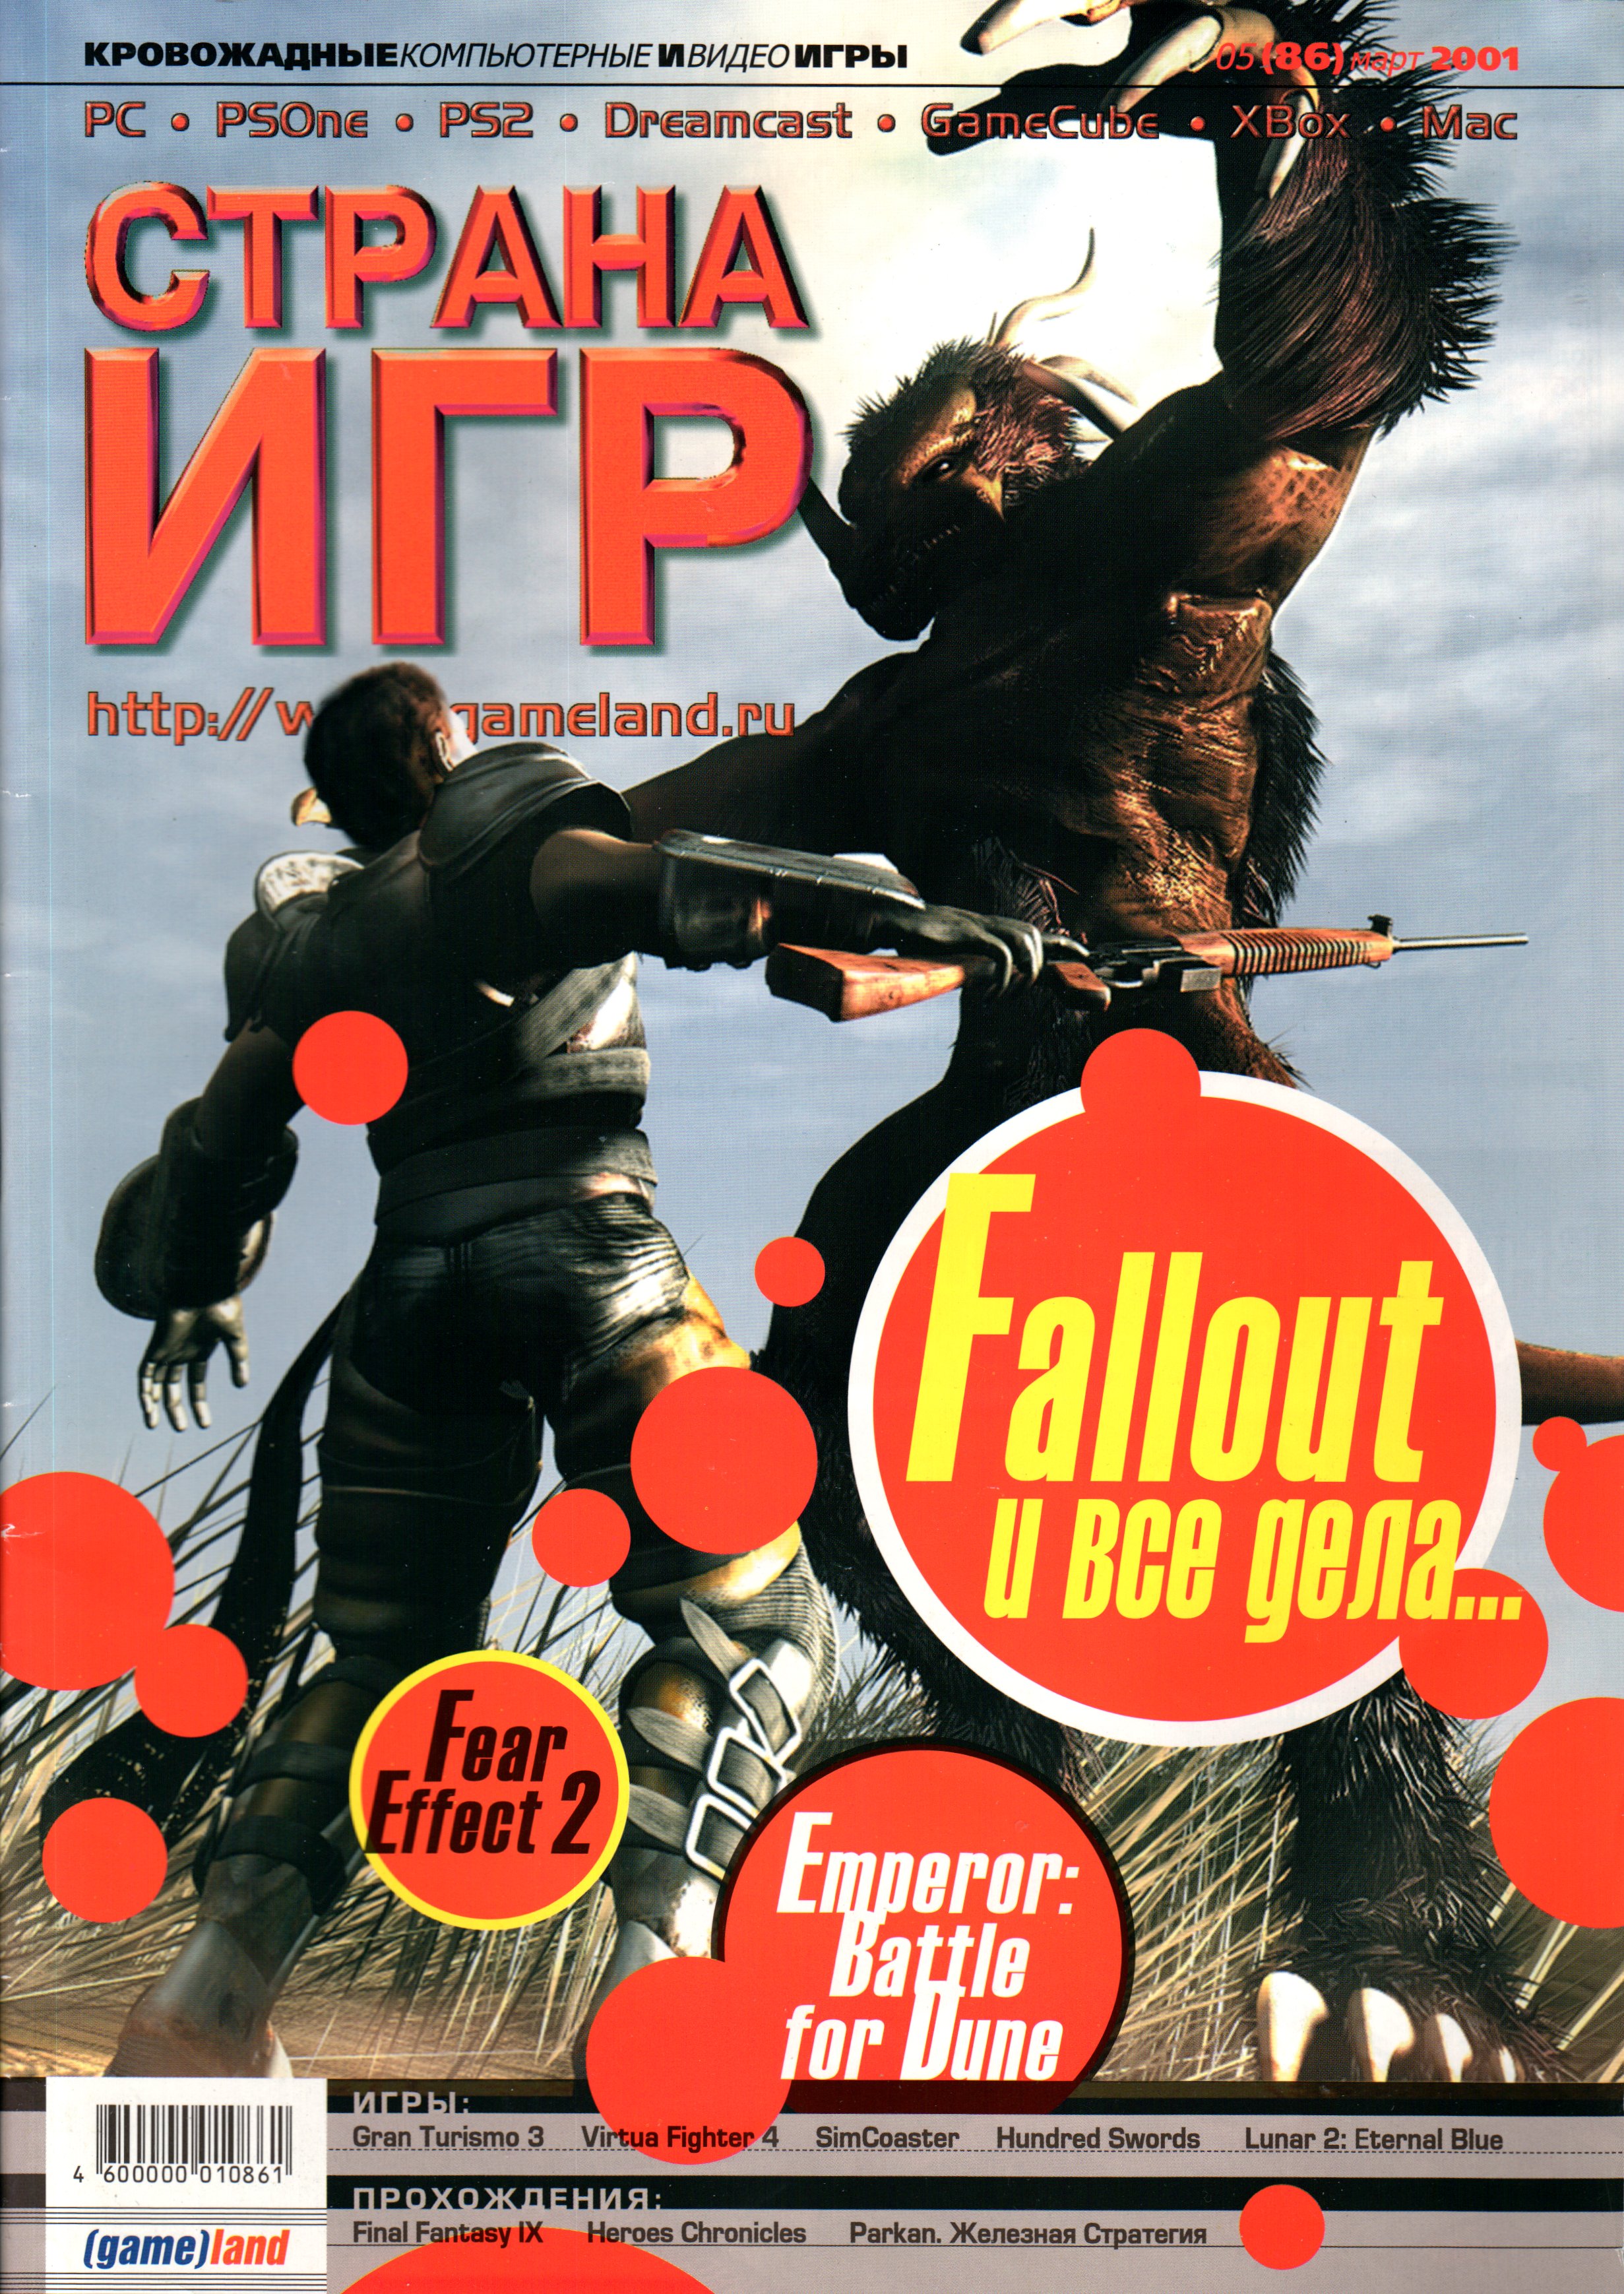 More information about "Game Land Issue 86 (March 2001)"